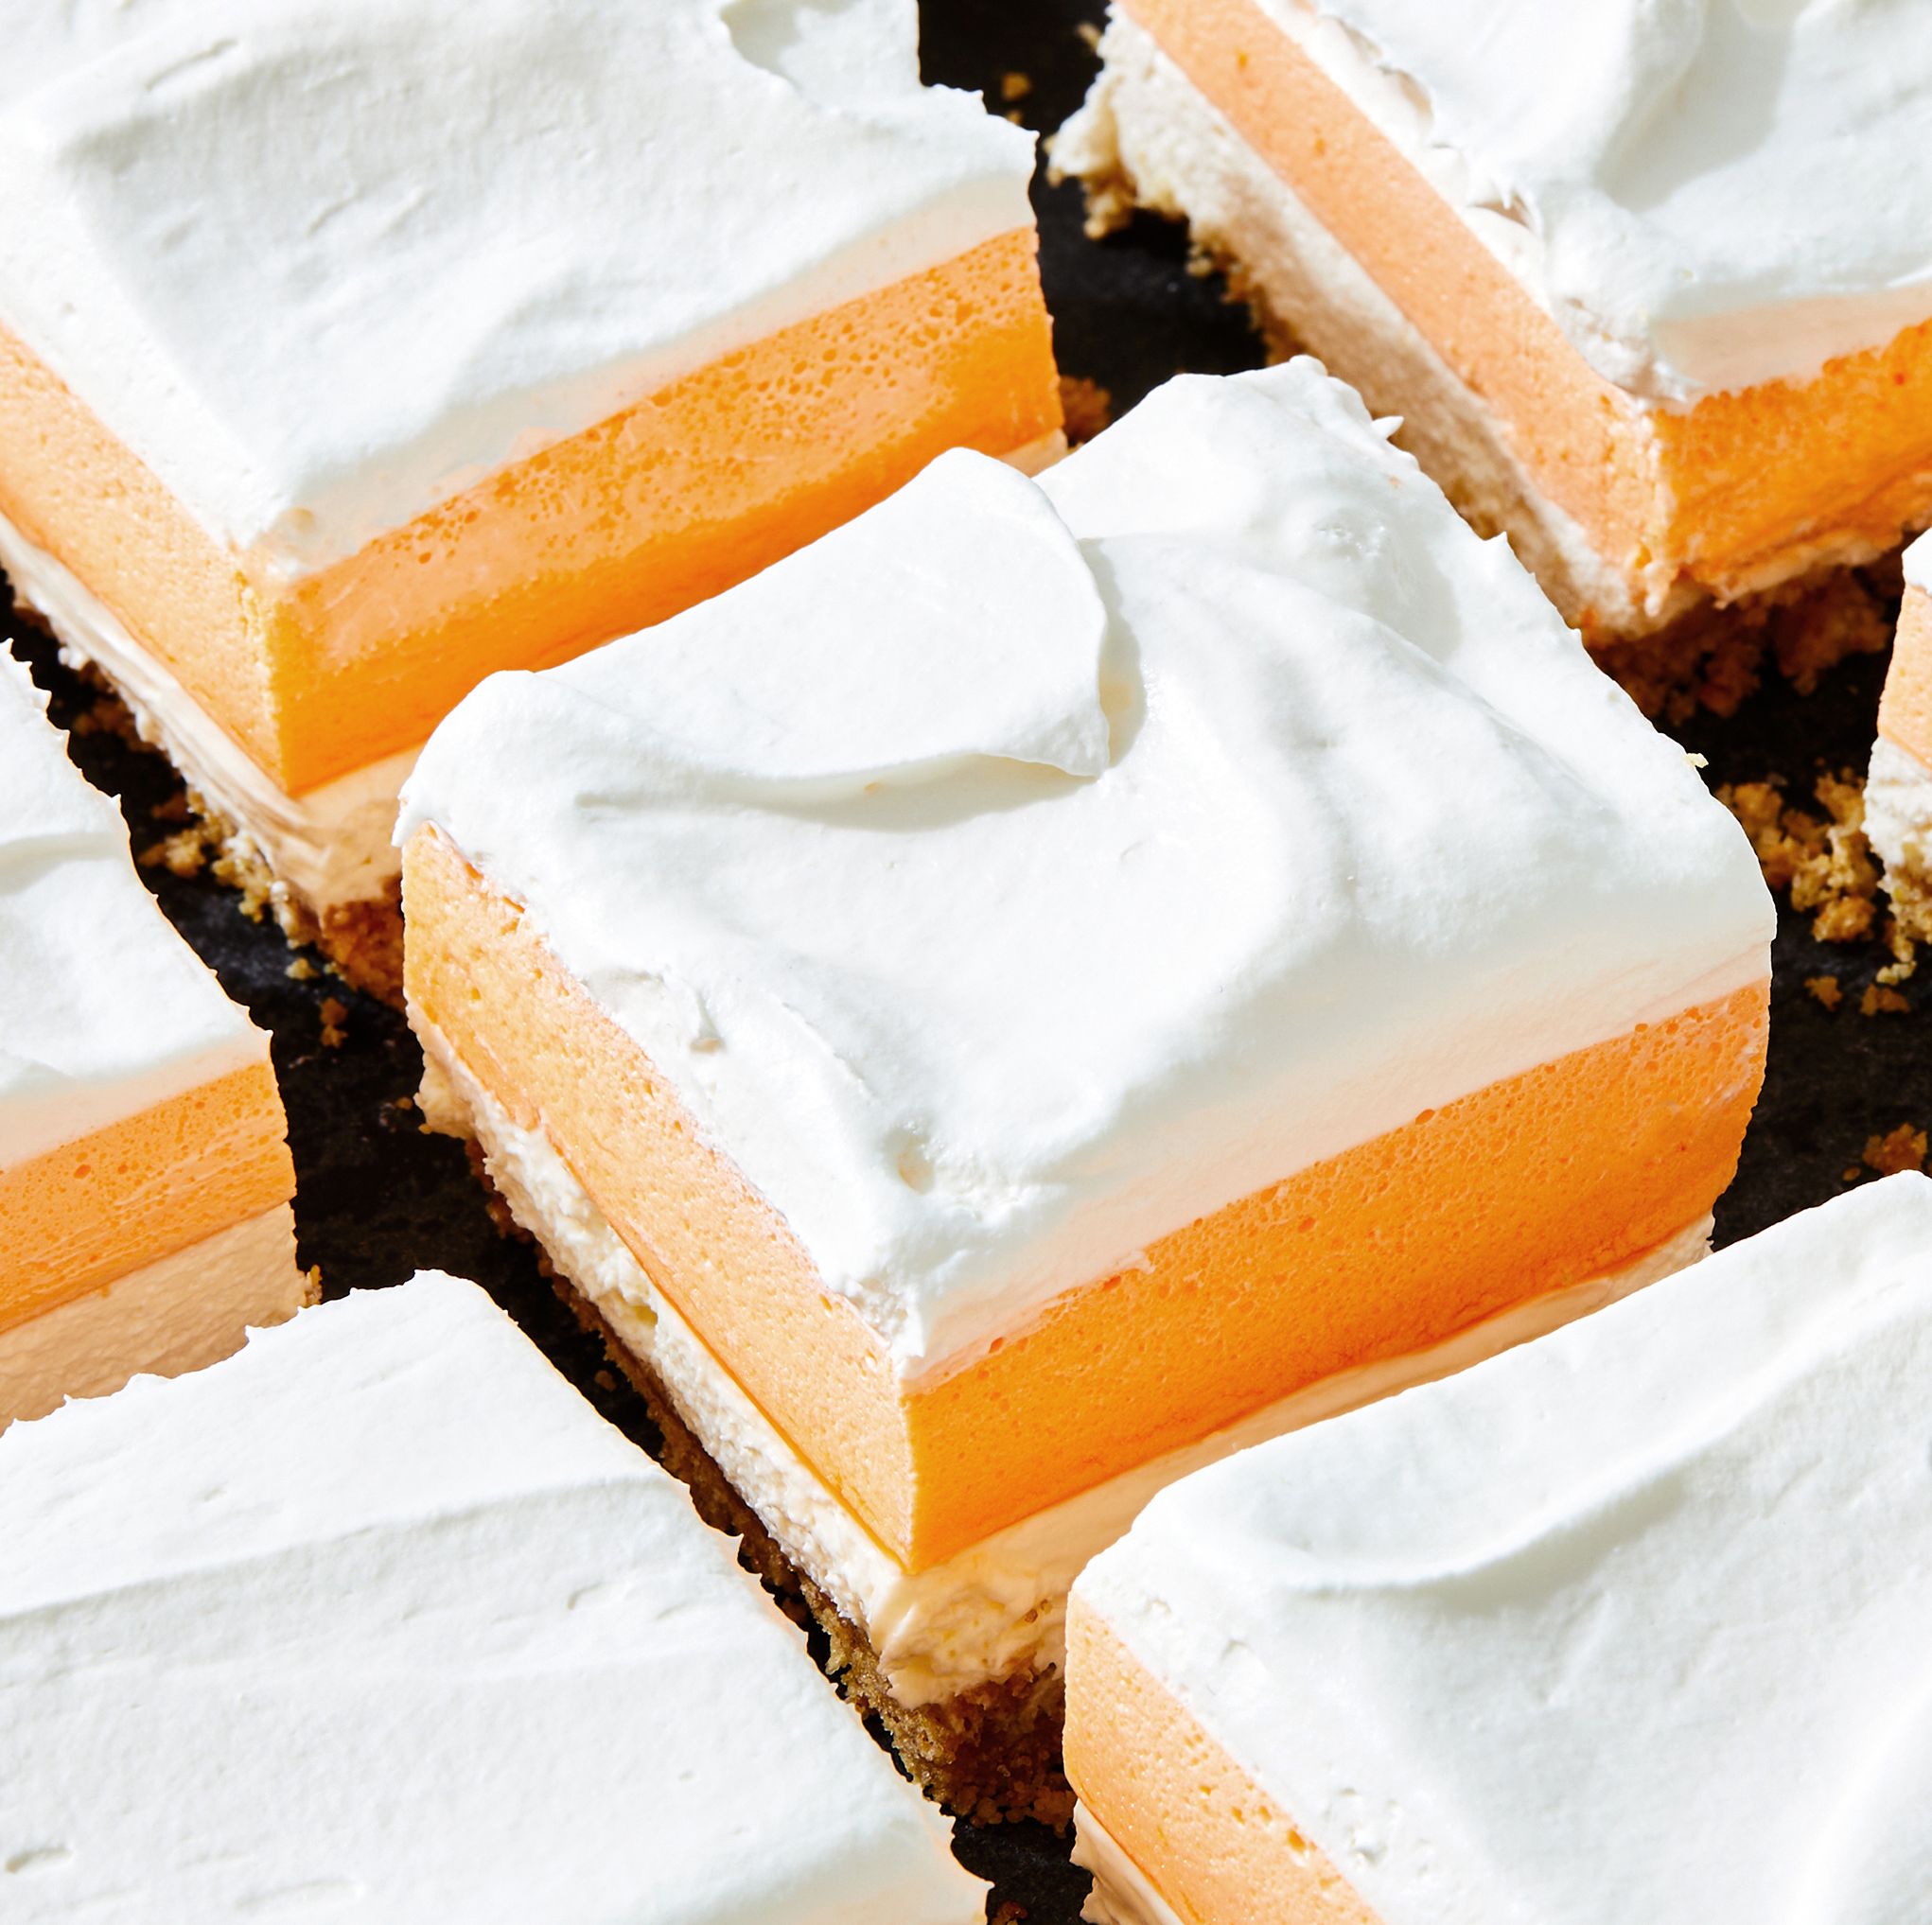 Orange Creamsicle Bars Are The Grown-Up Version Of Your Favorite Childhood Treat